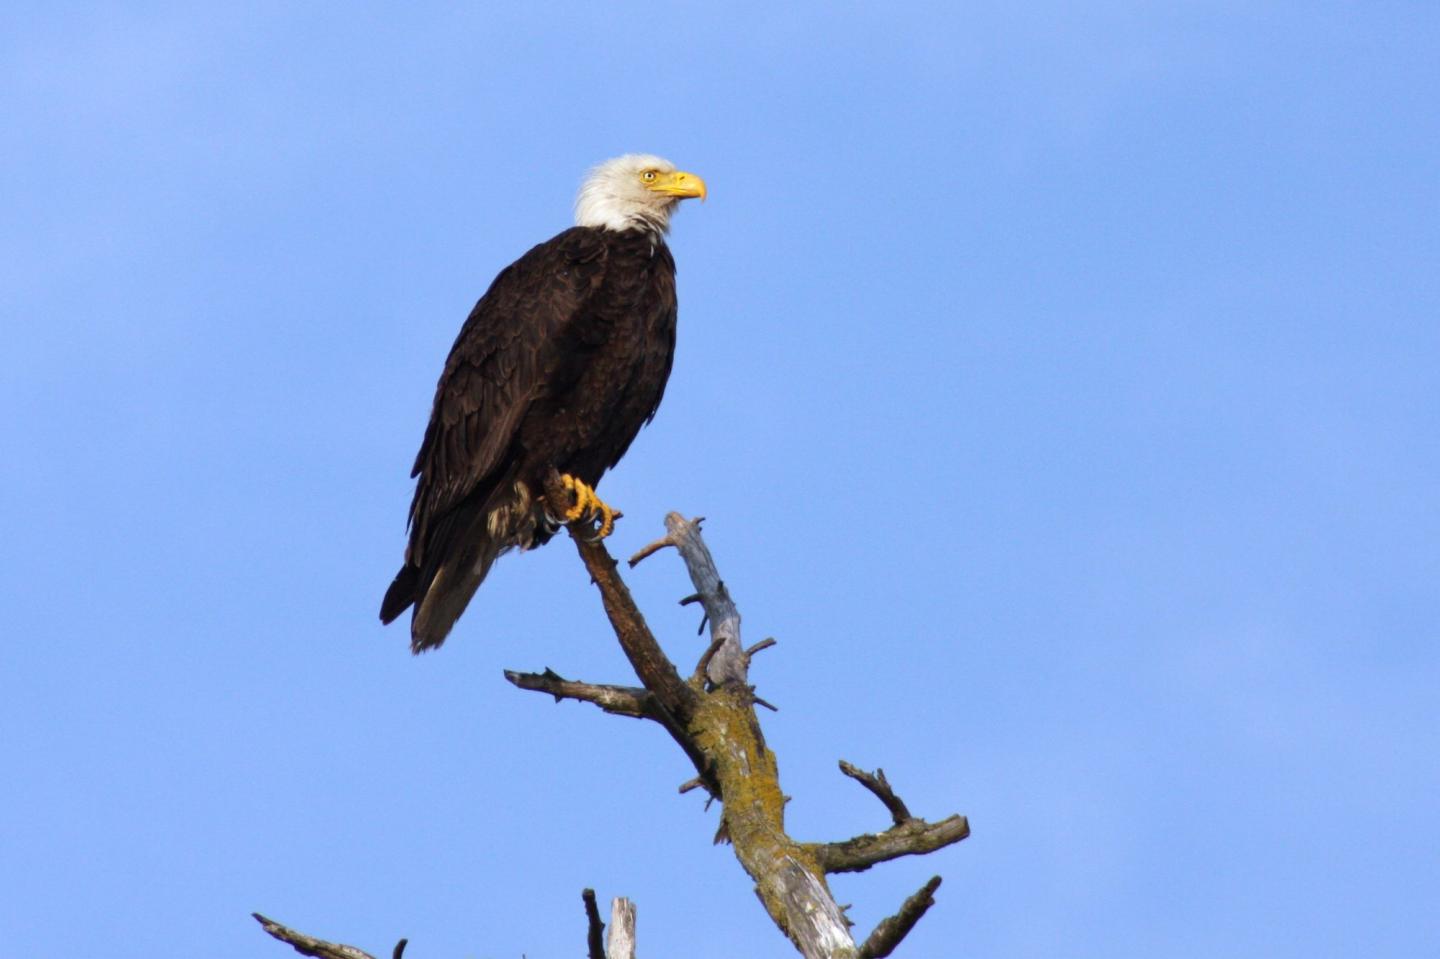 82% of dead US eagles studied between 2014-18 had rat poison in their systems